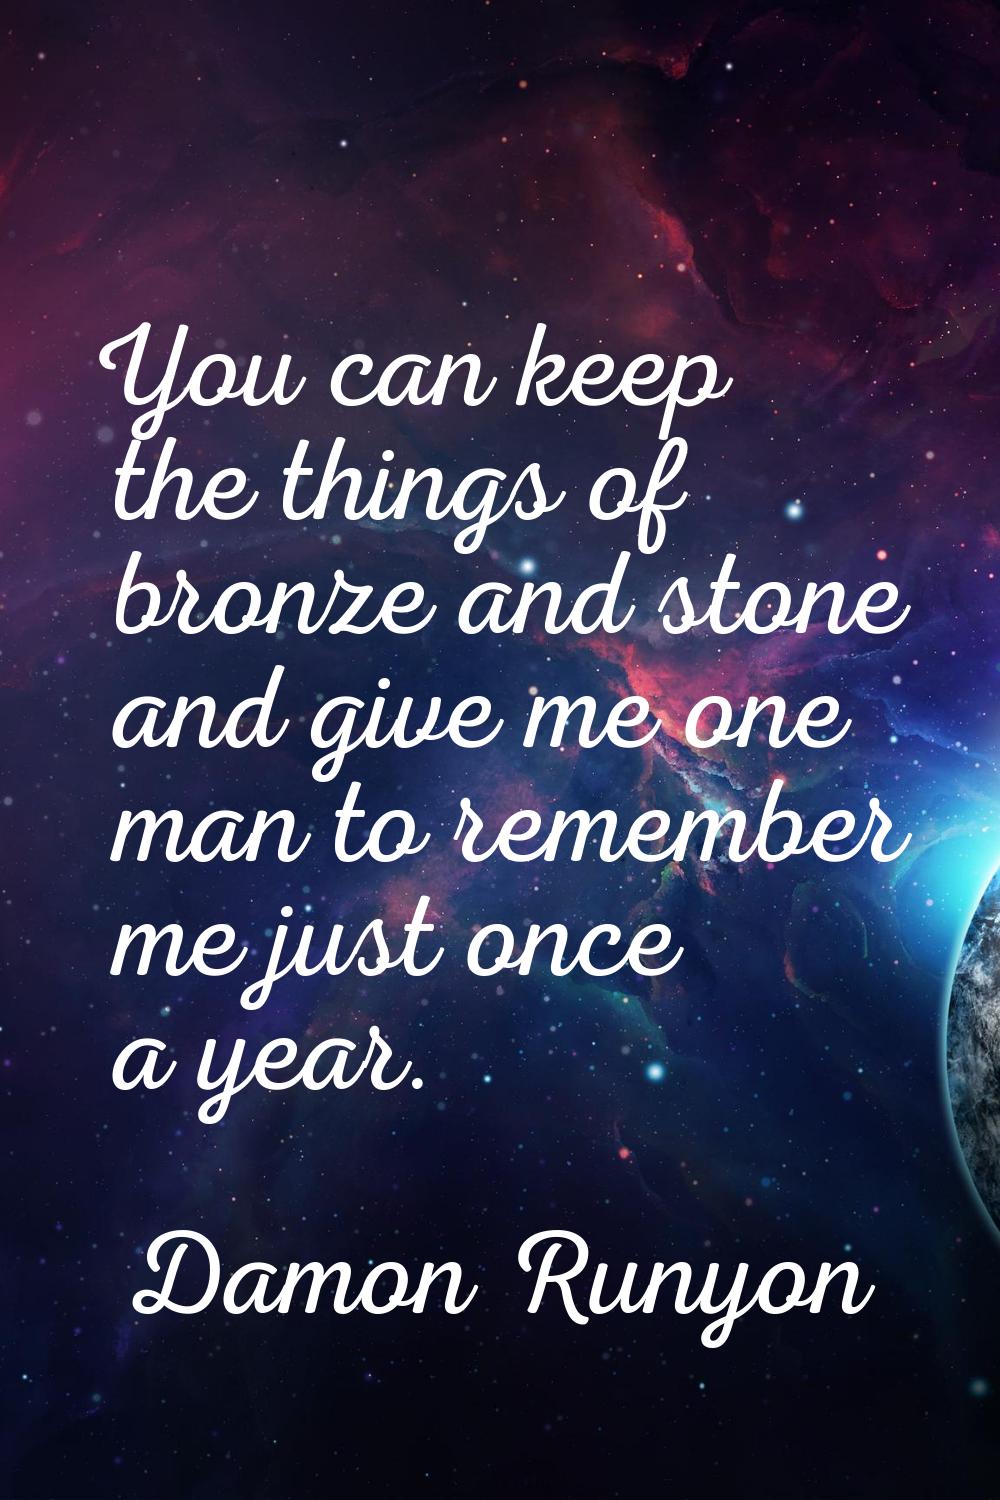 You can keep the things of bronze and stone and give me one man to remember me just once a year.